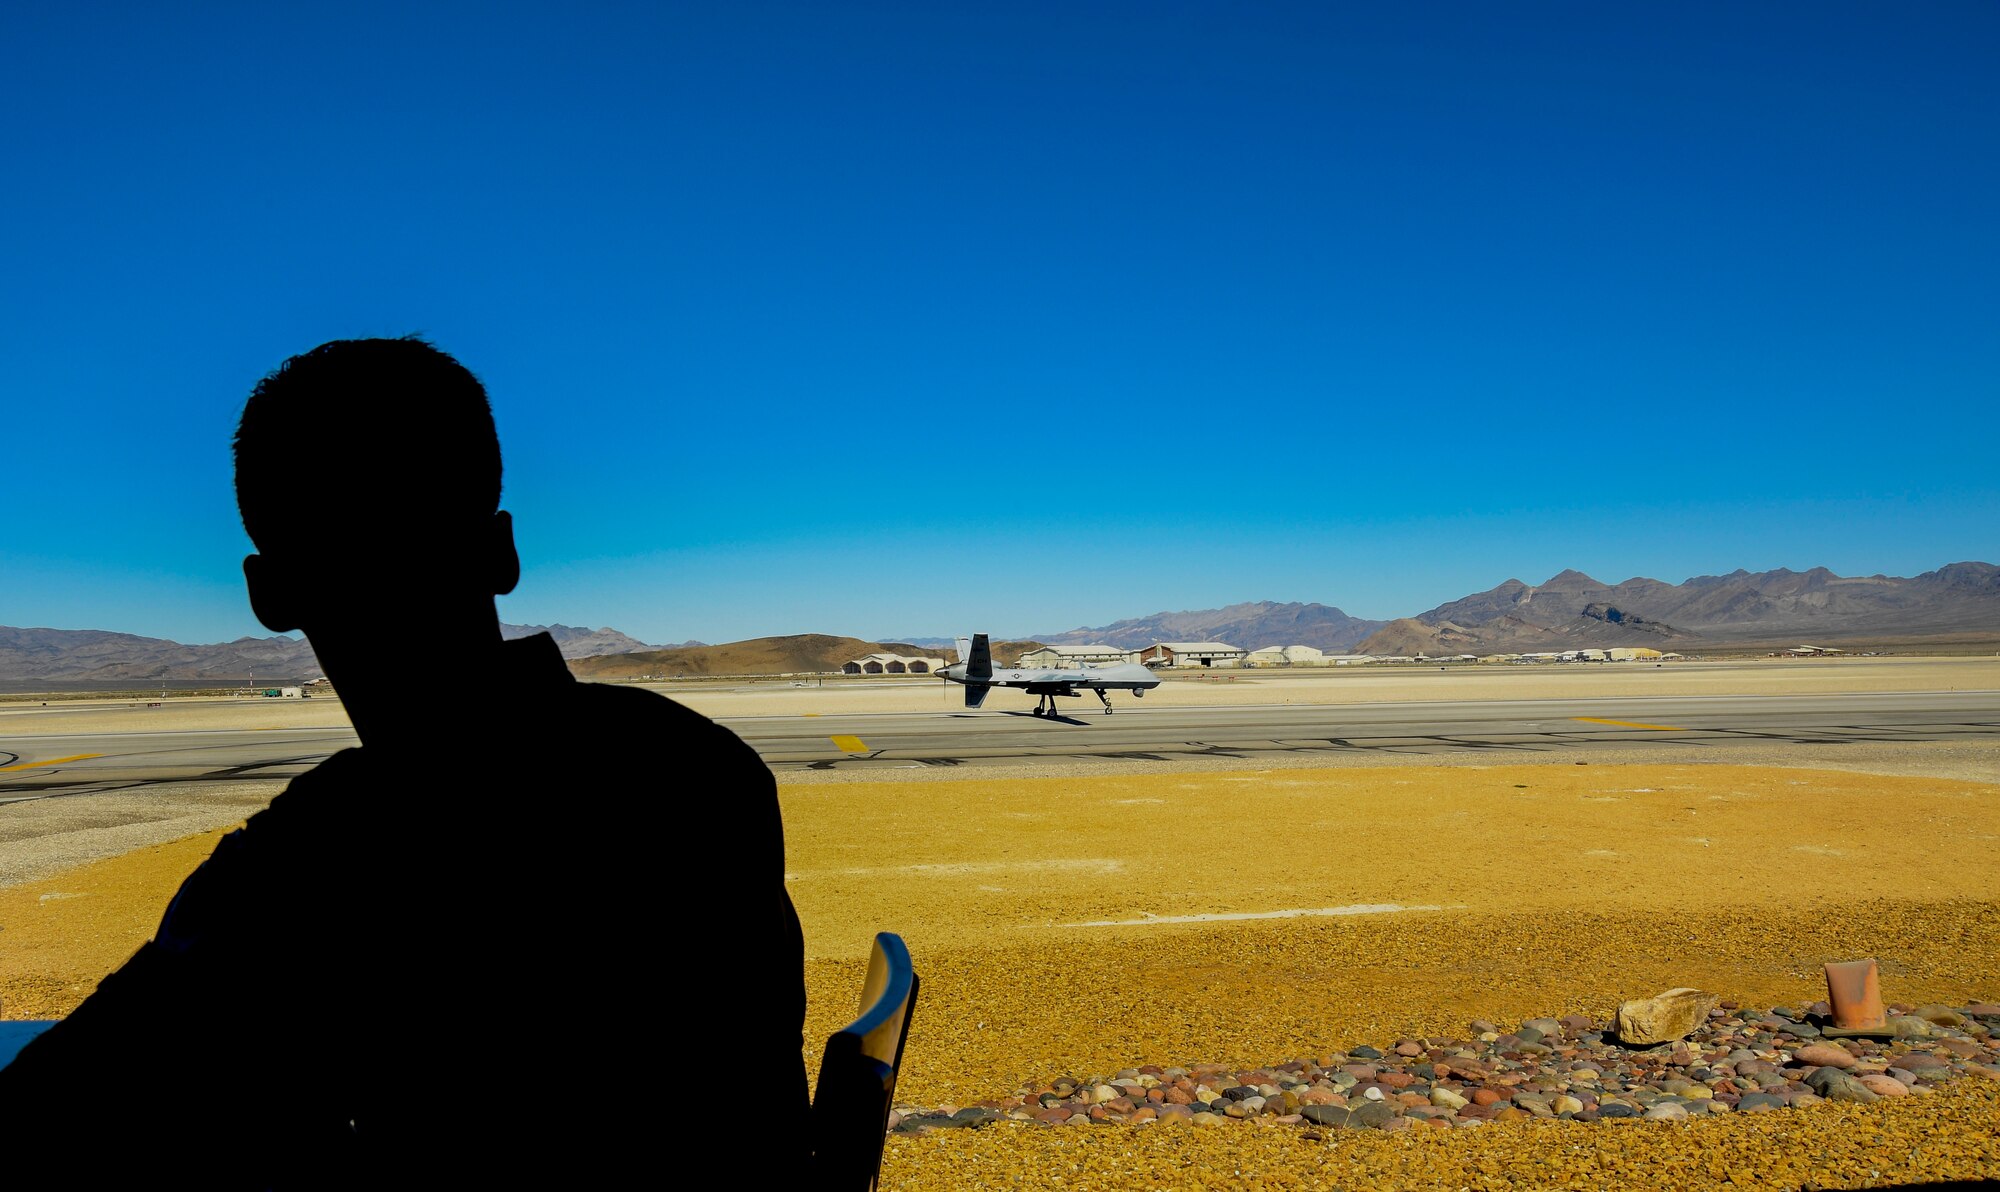 An Airman assigned to the 11th Attack Squadron watches an MQ-9 Reaper land on the runway March 3, 2017, at Creech Air Force Base, Nev. The 11th ATKS became the first remotely piloted aircraft squadron in the Air Force in 1995 and continues to conduct MQ-1 Predator and MQ-9 Reaper aircrew launch and recovery training today. (U.S. Air Force photo illustration/Airman 1st Class James Thompson)
